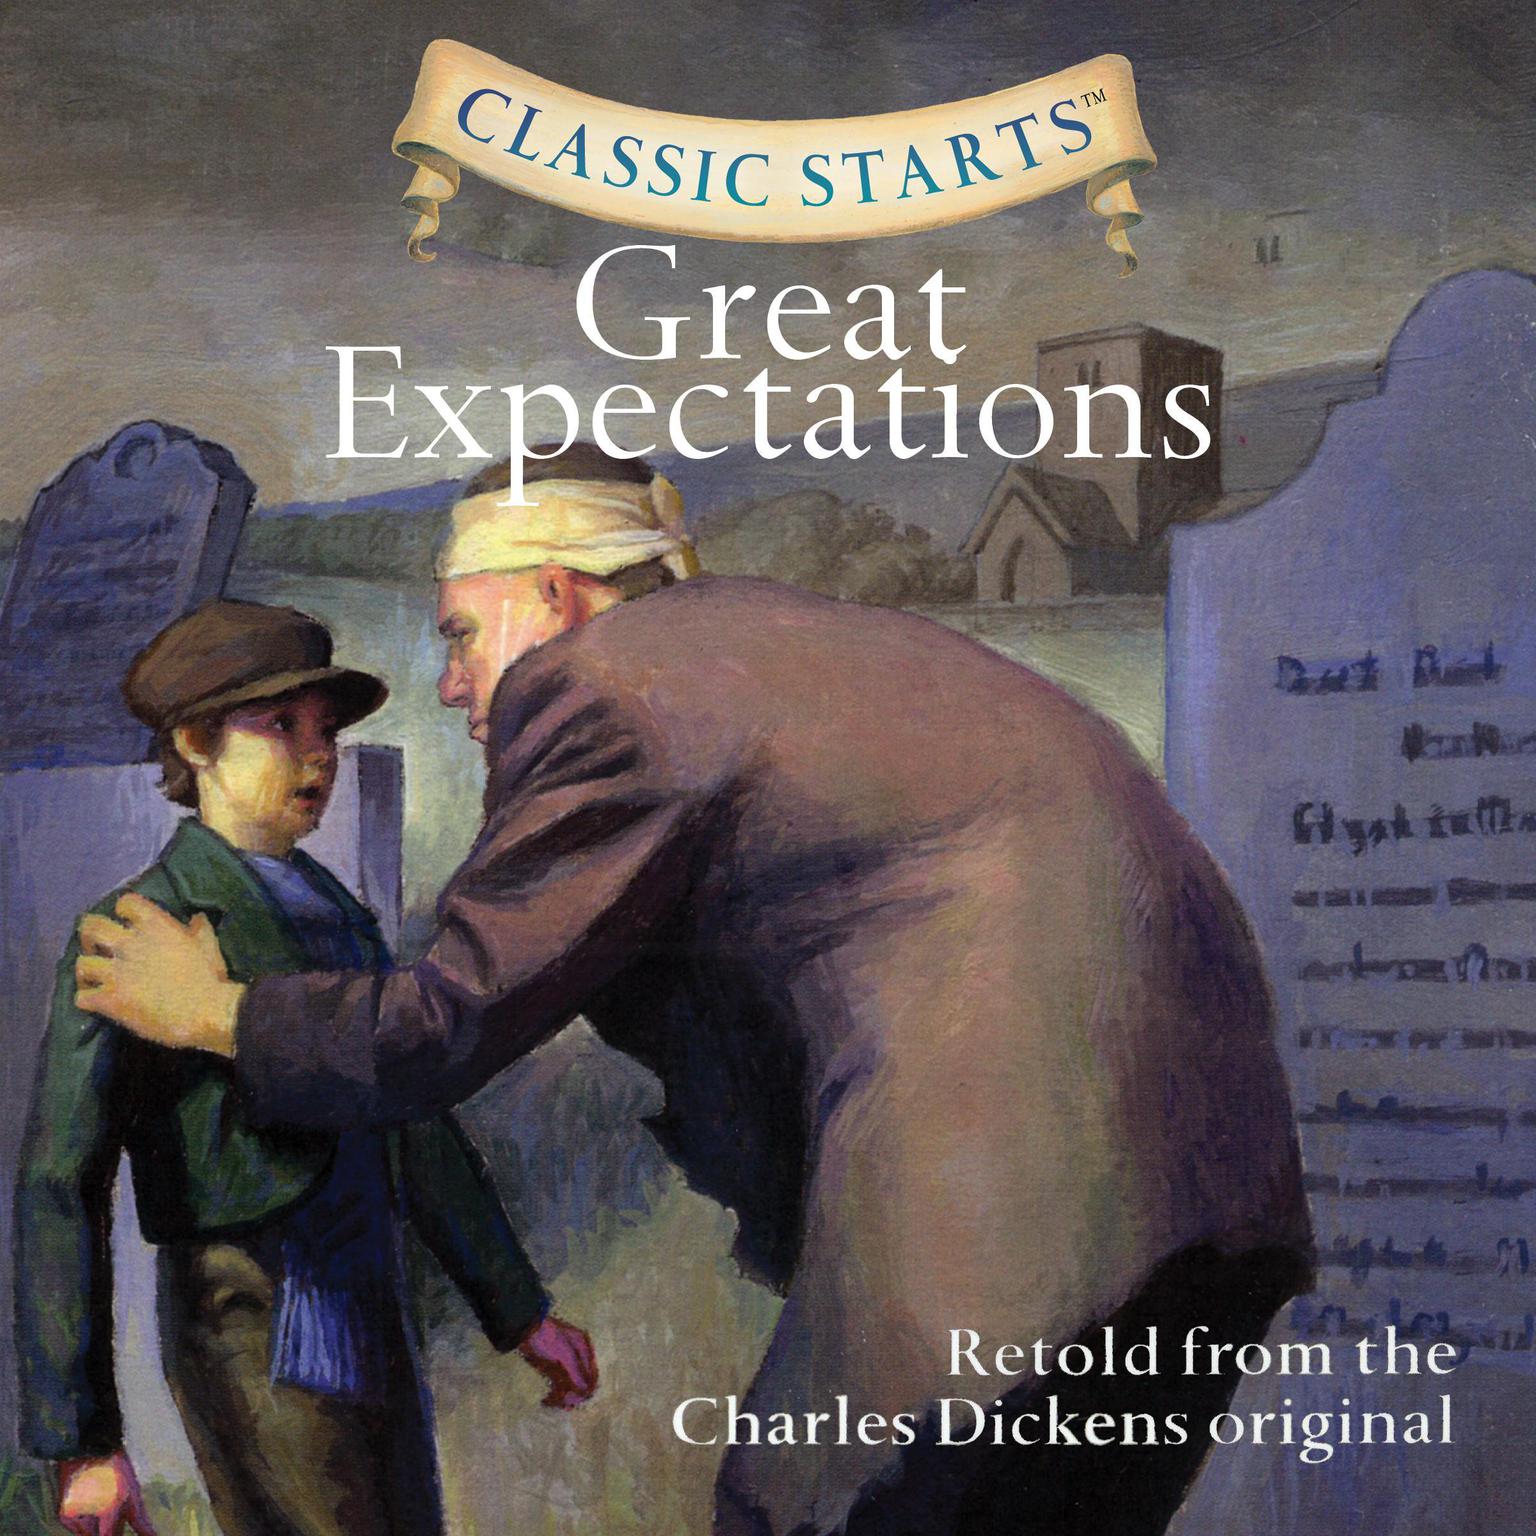 Great Expectations Audiobook, by Charles Dickens